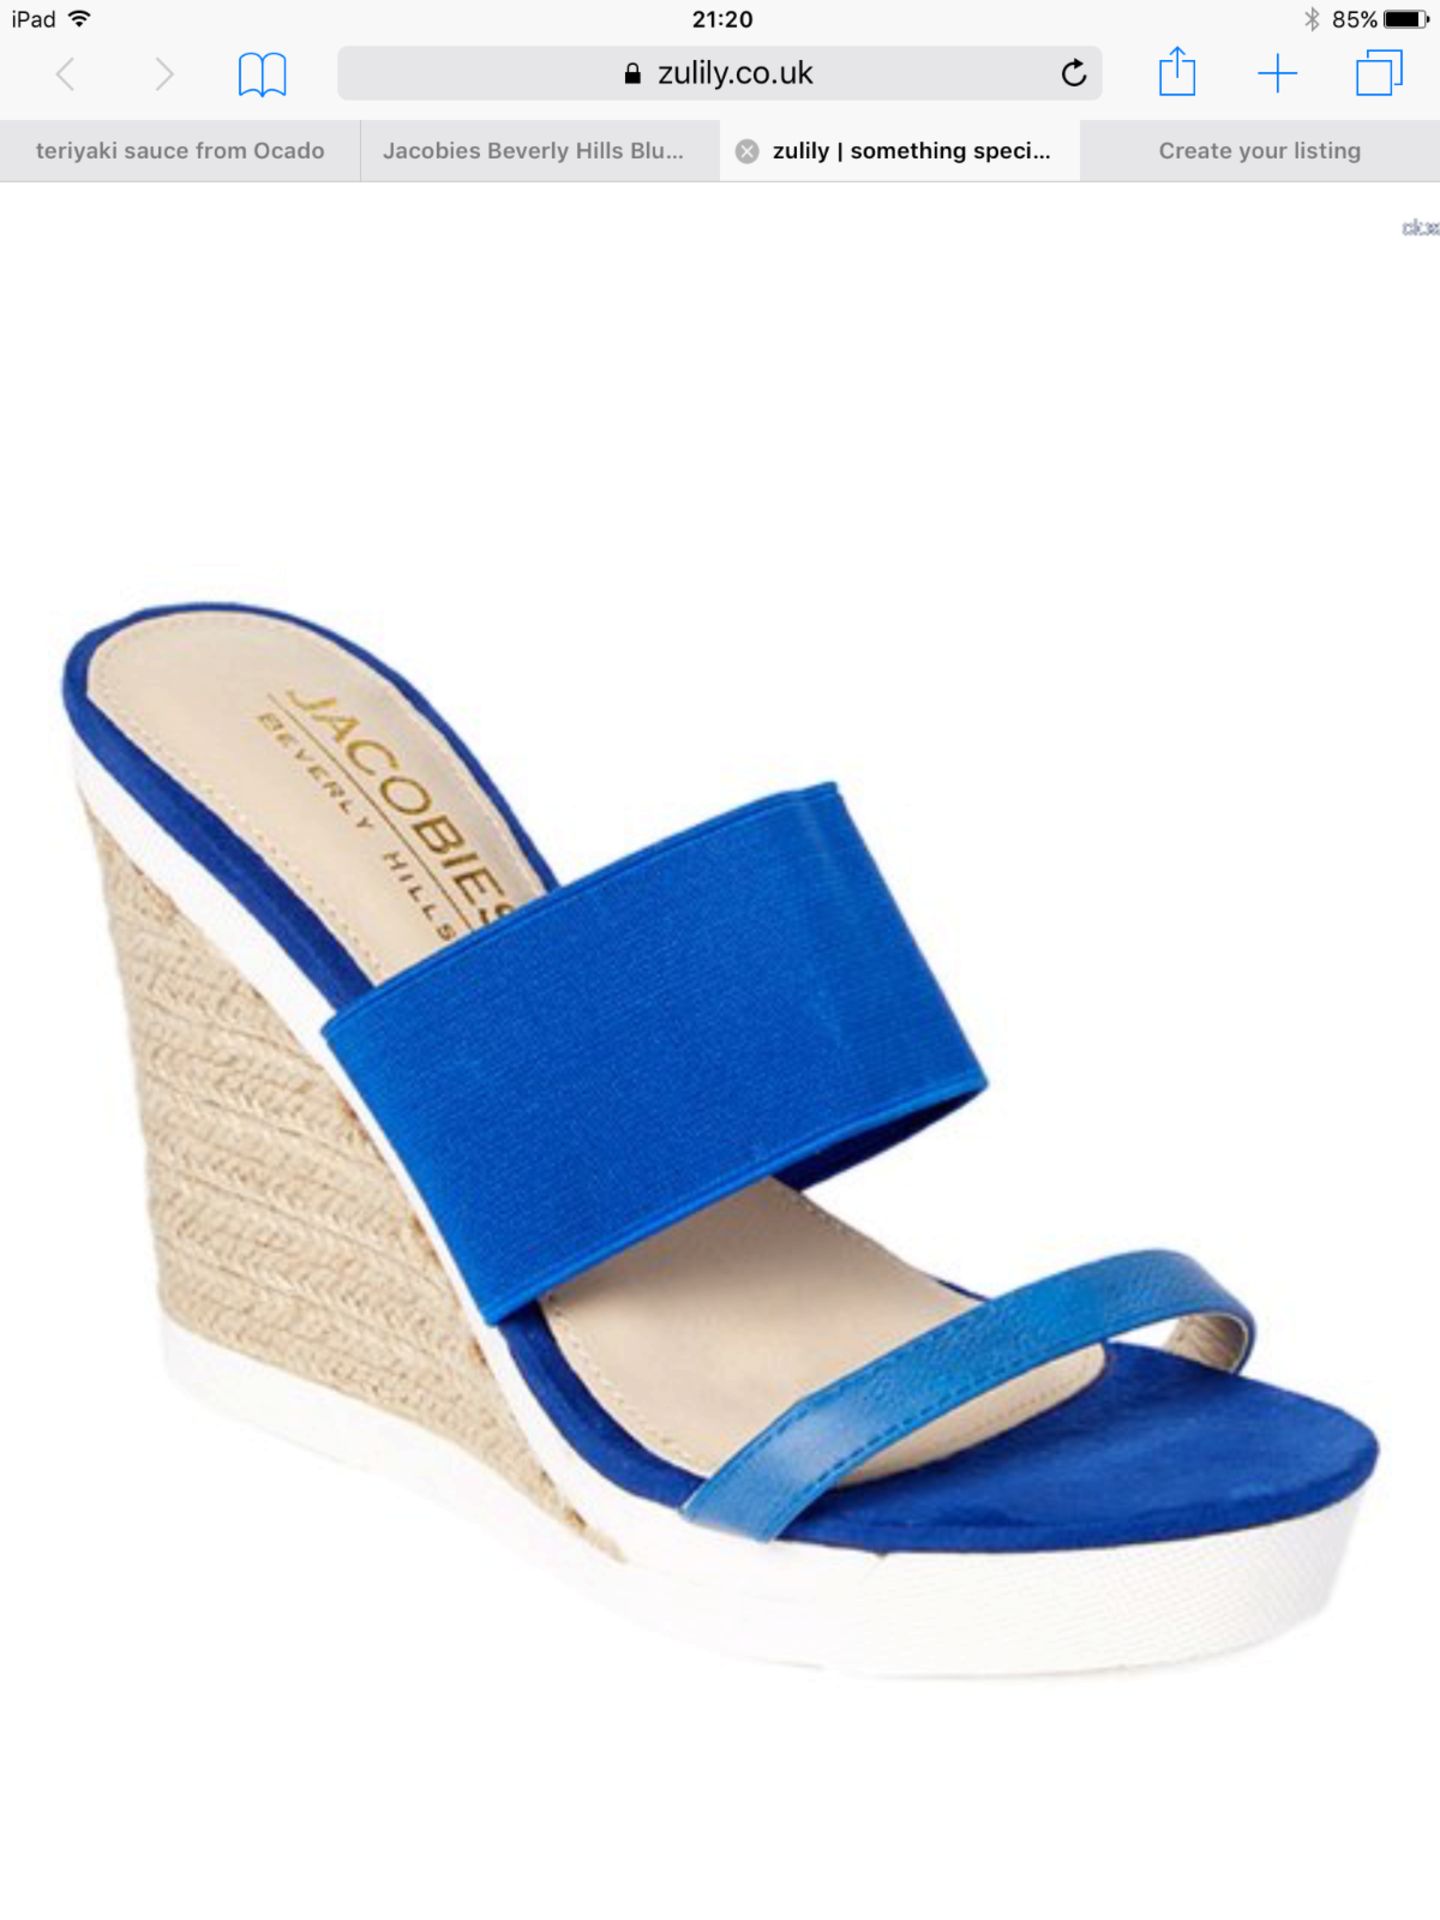 Jacobies Beverly Hills Blue & White Thelma Sandal, Size Uk 3-3.5 Us 5.5 (New With Box) [Ref: